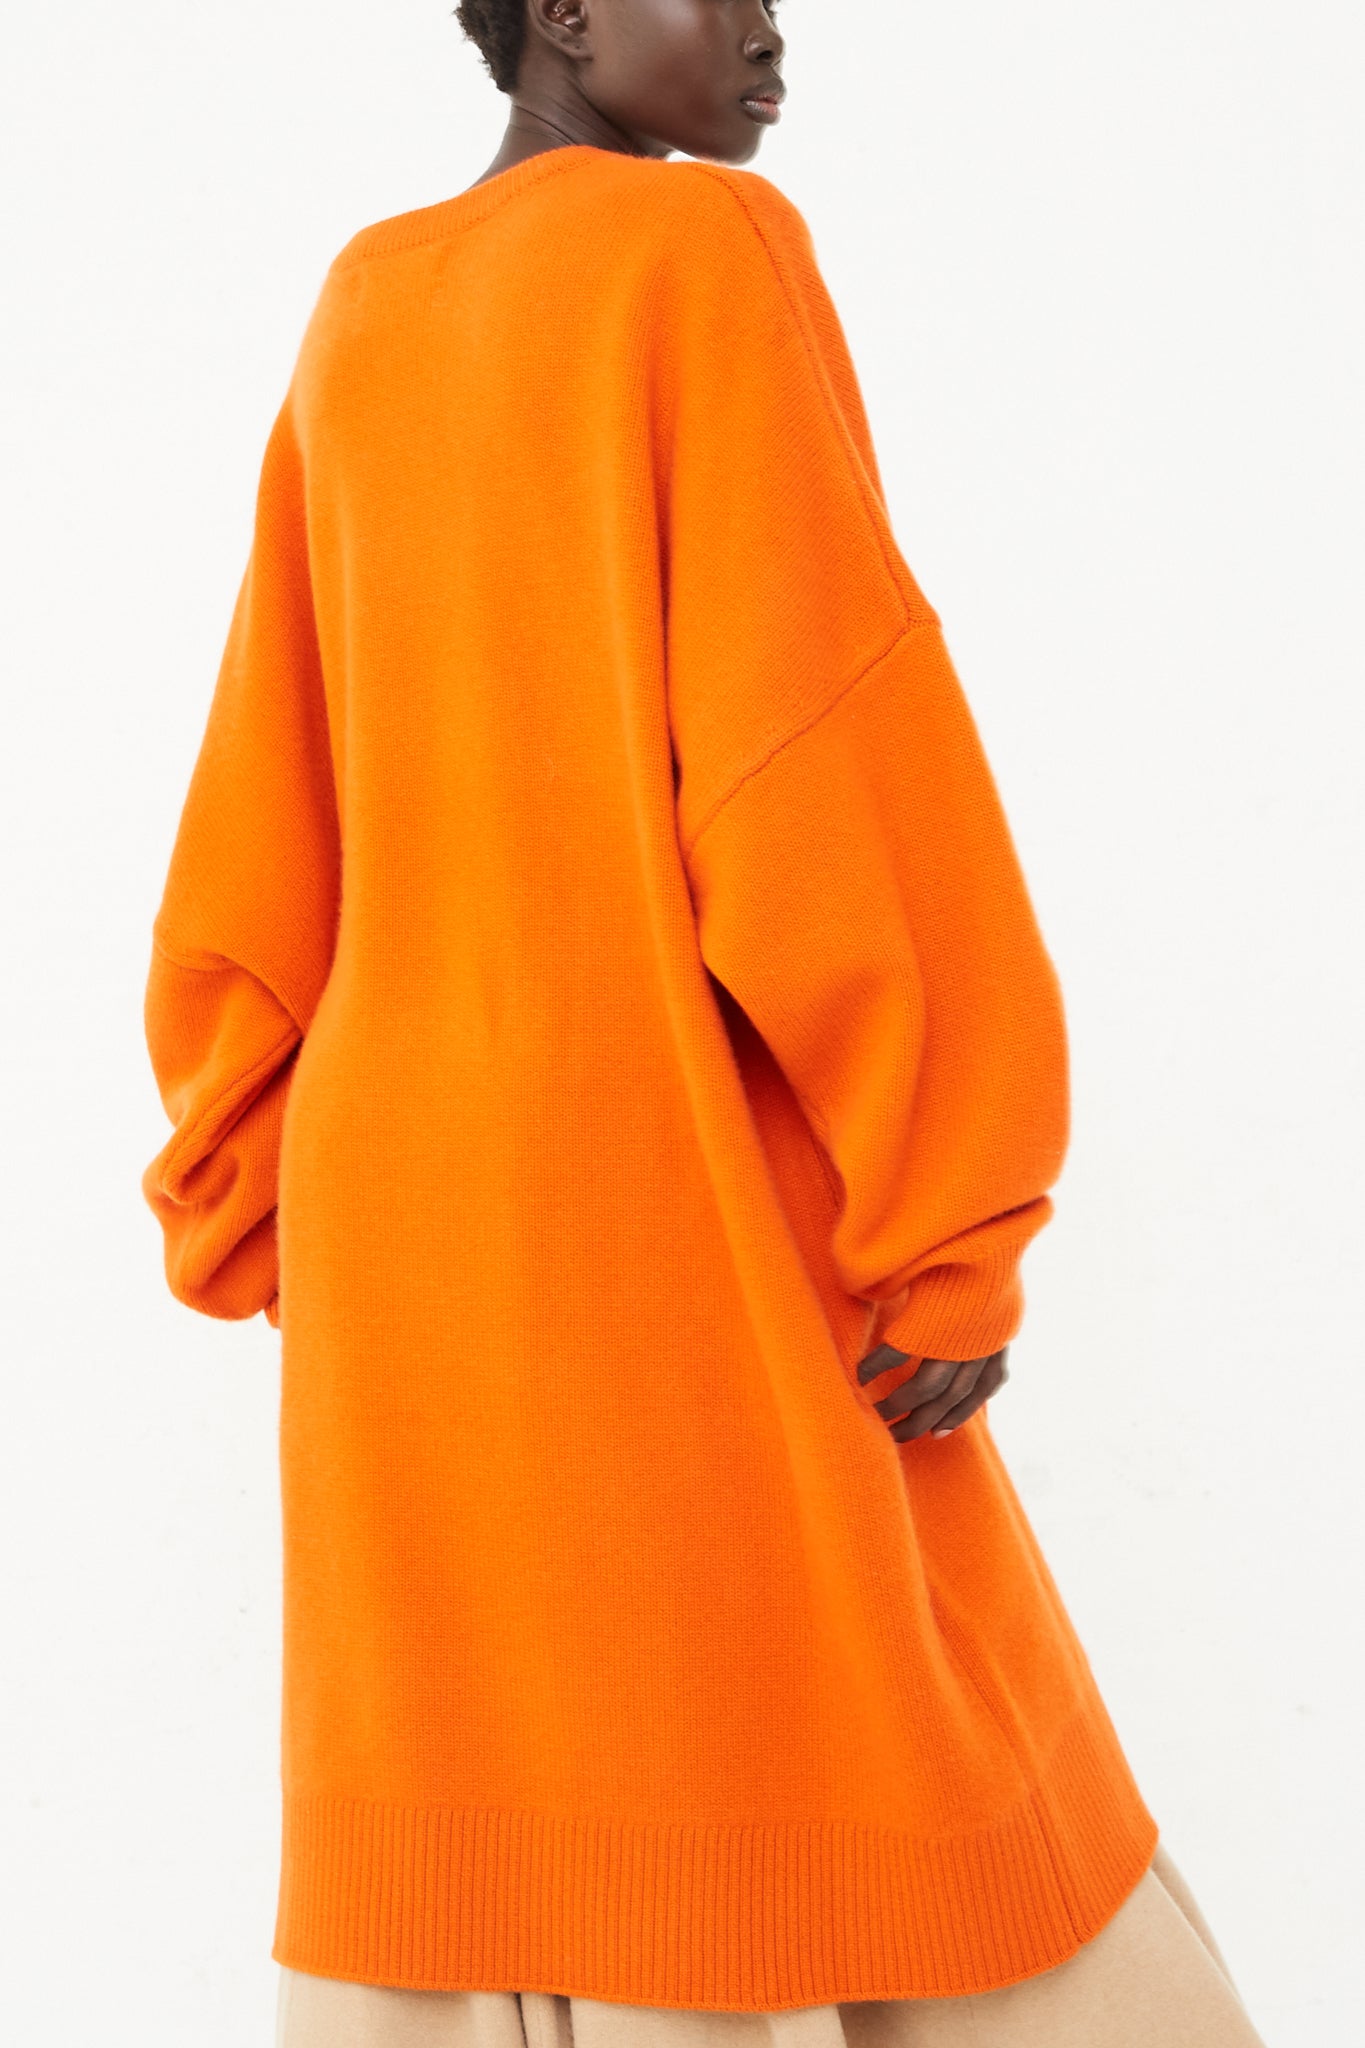 The back view of a model wearing an orange long-sleeved sweater from the Extreme Cashmere collection at Oroboro Store.